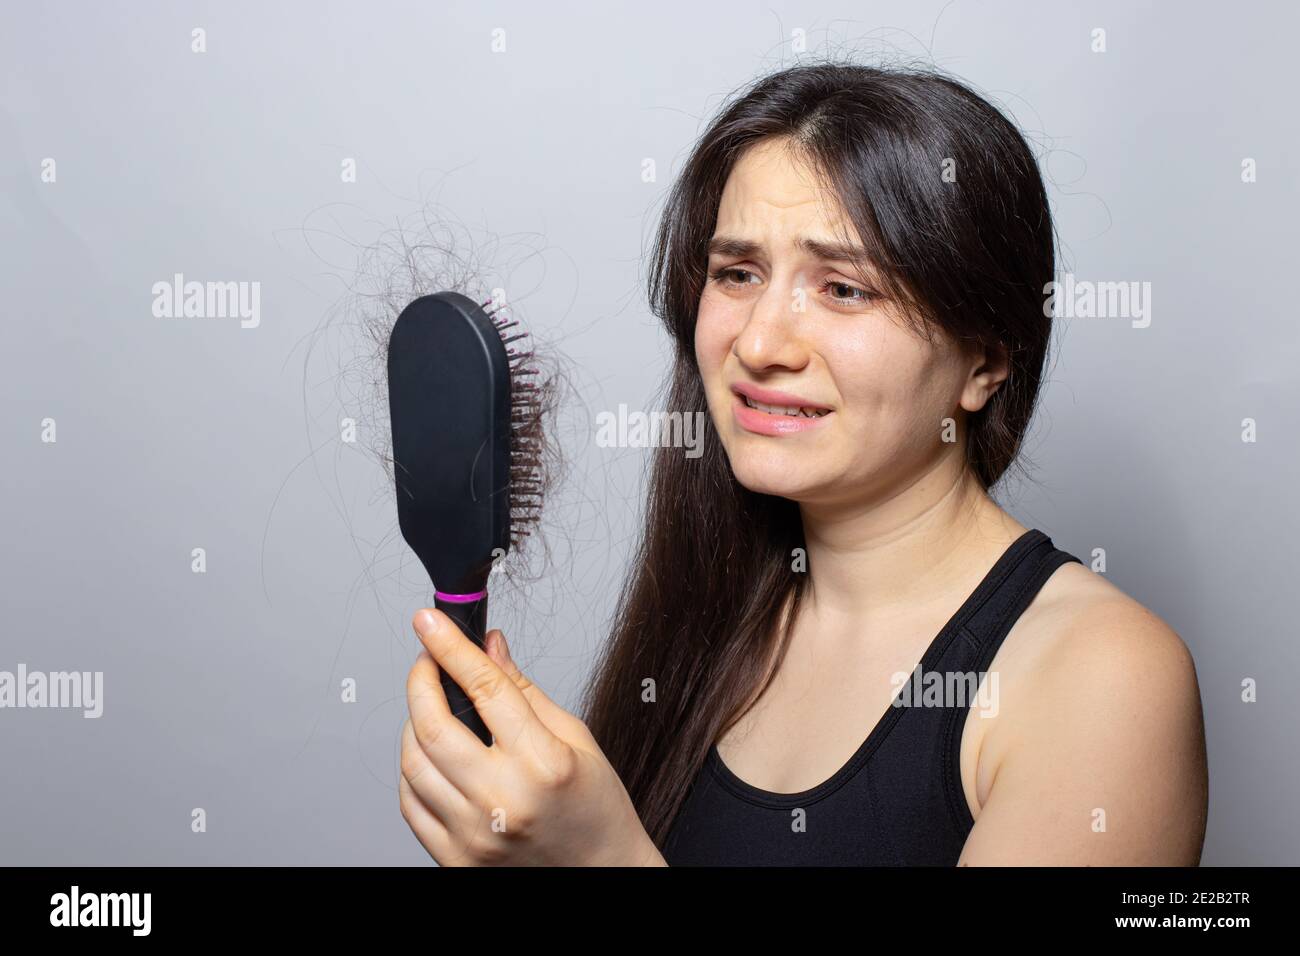 The girl holds a comb for hair with fallen hair. Hair loss, hair care. Stock Photo